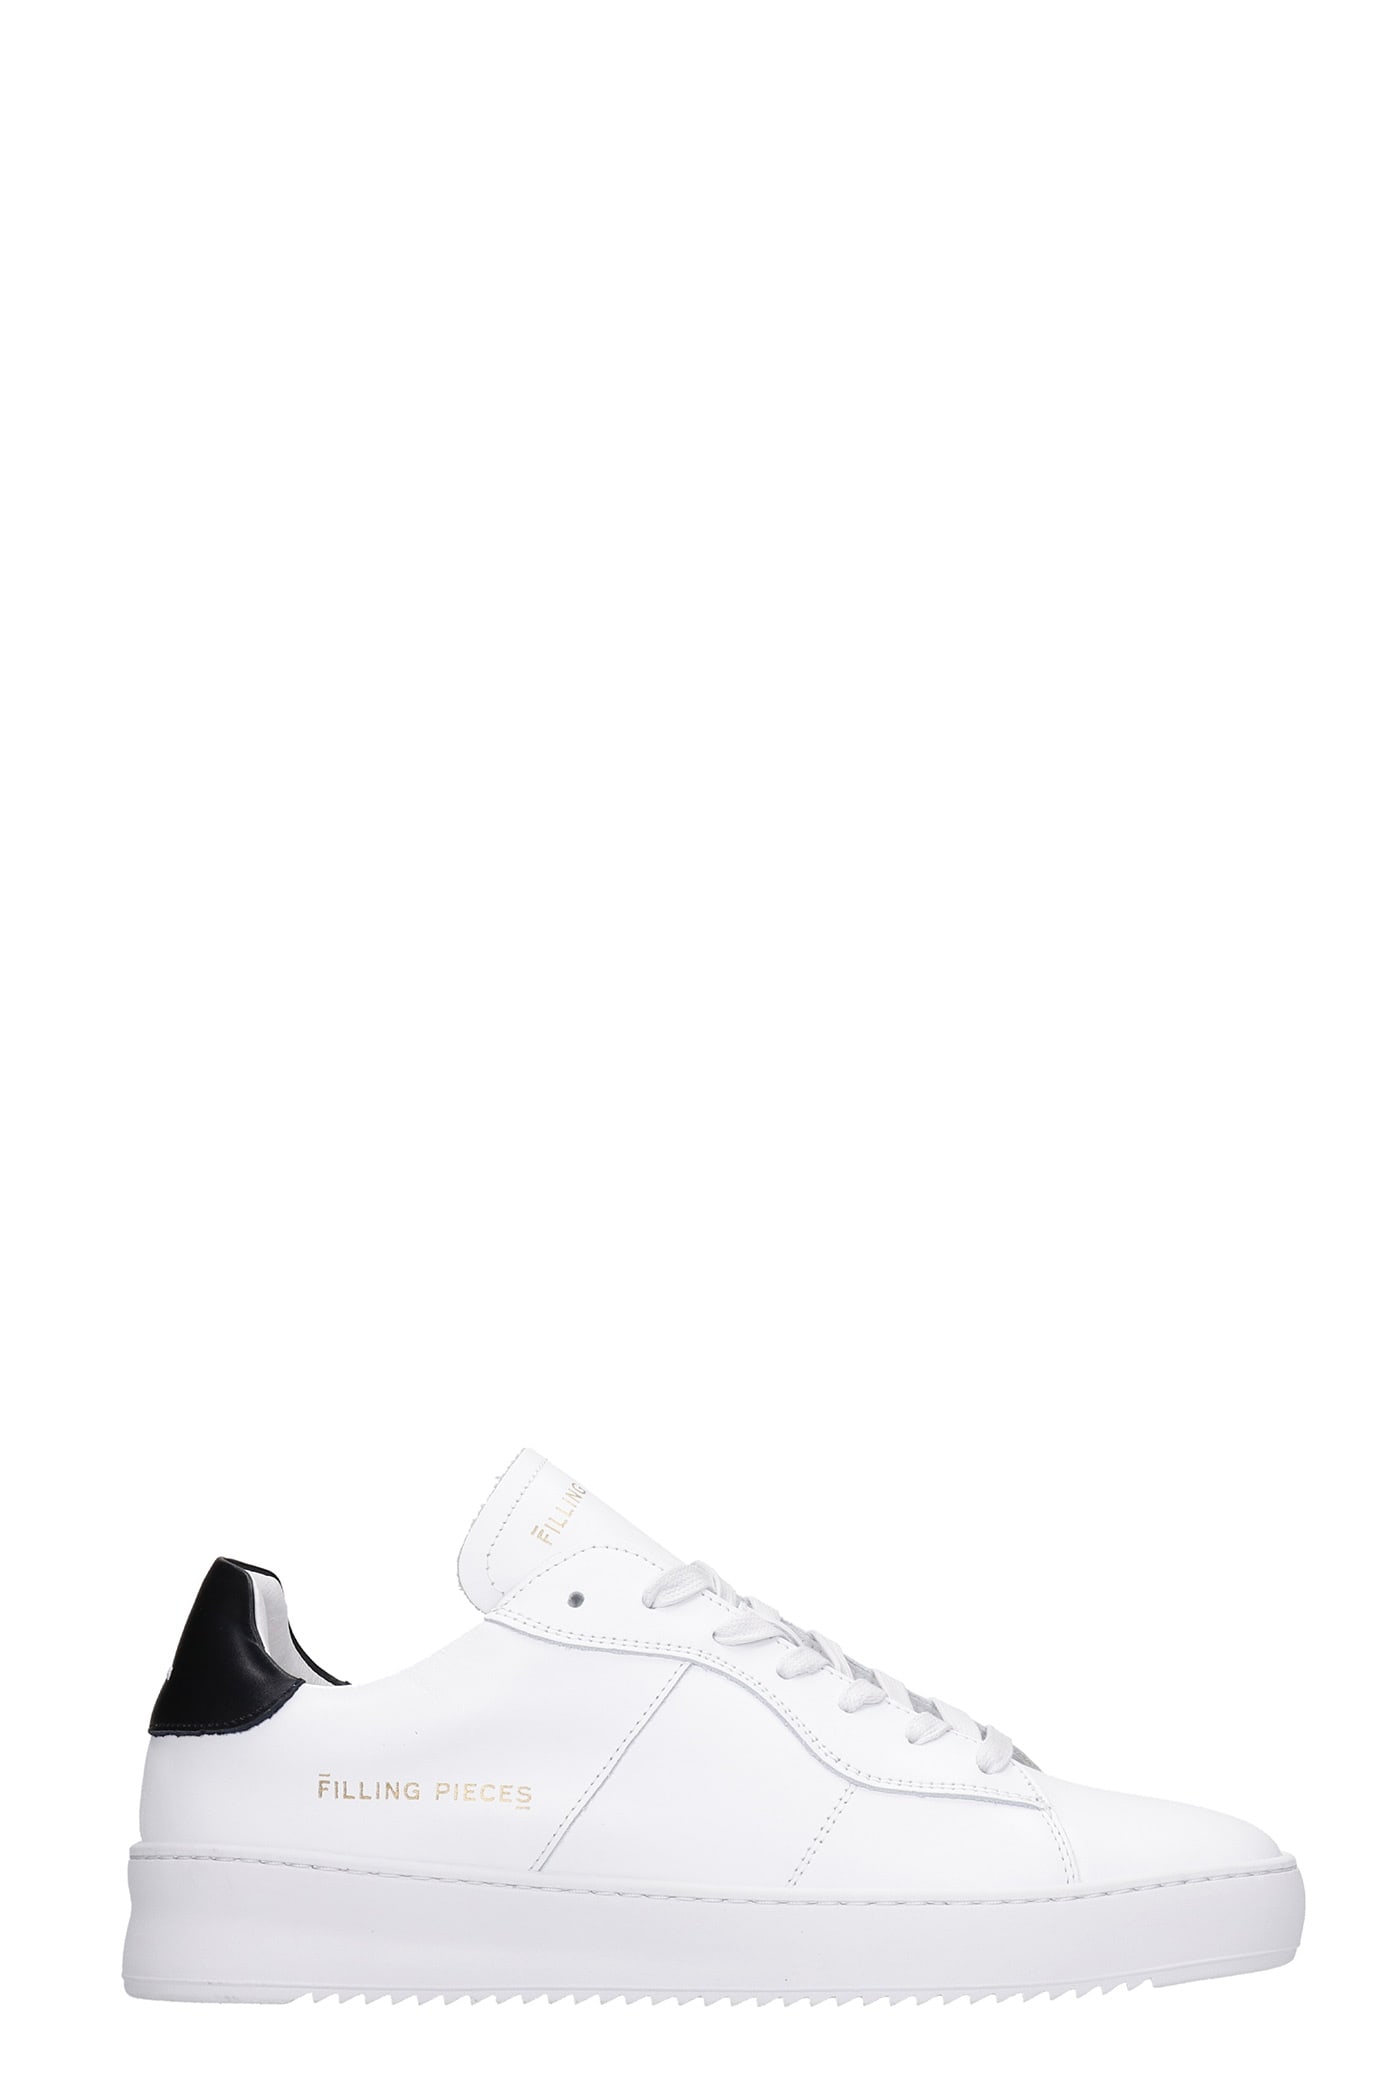 Filling Pieces Court Sneakers In White Leather